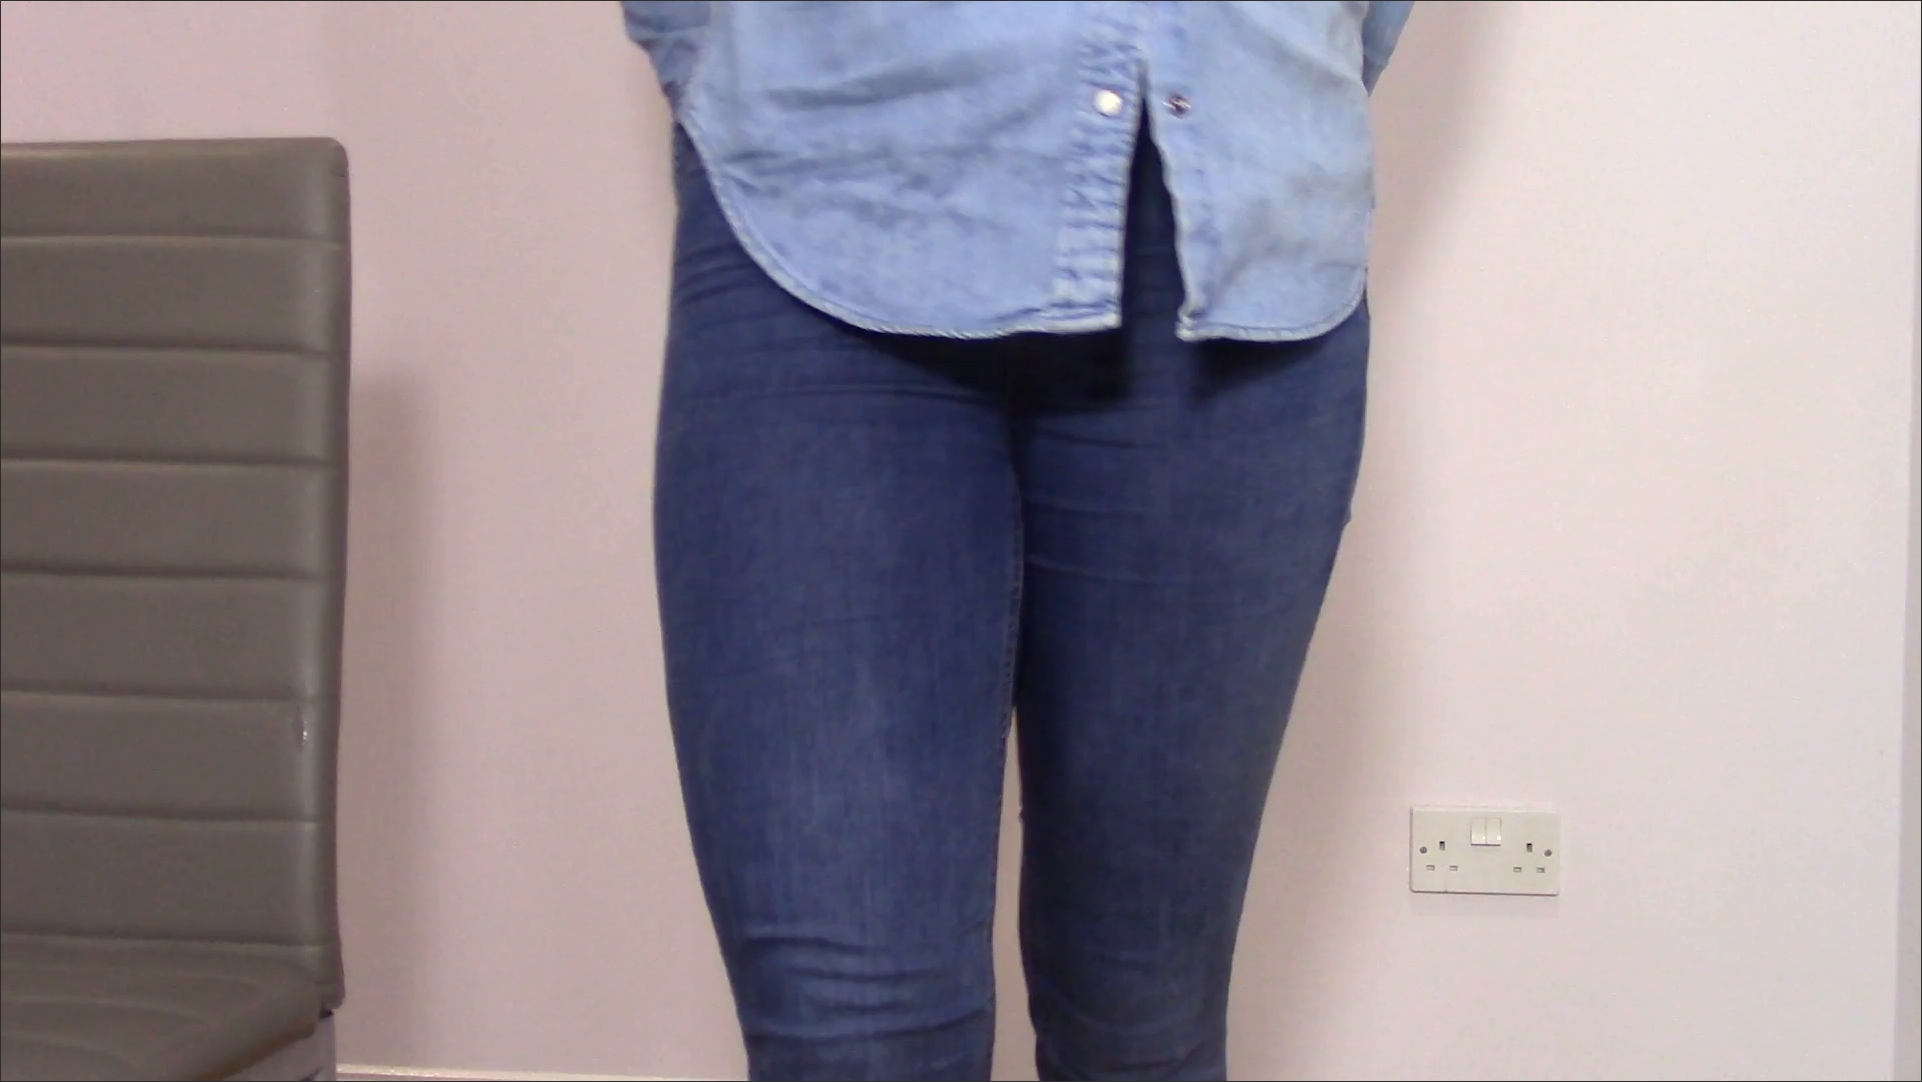 Onlyevamarie Girl Pees Jeans Allday mp 4